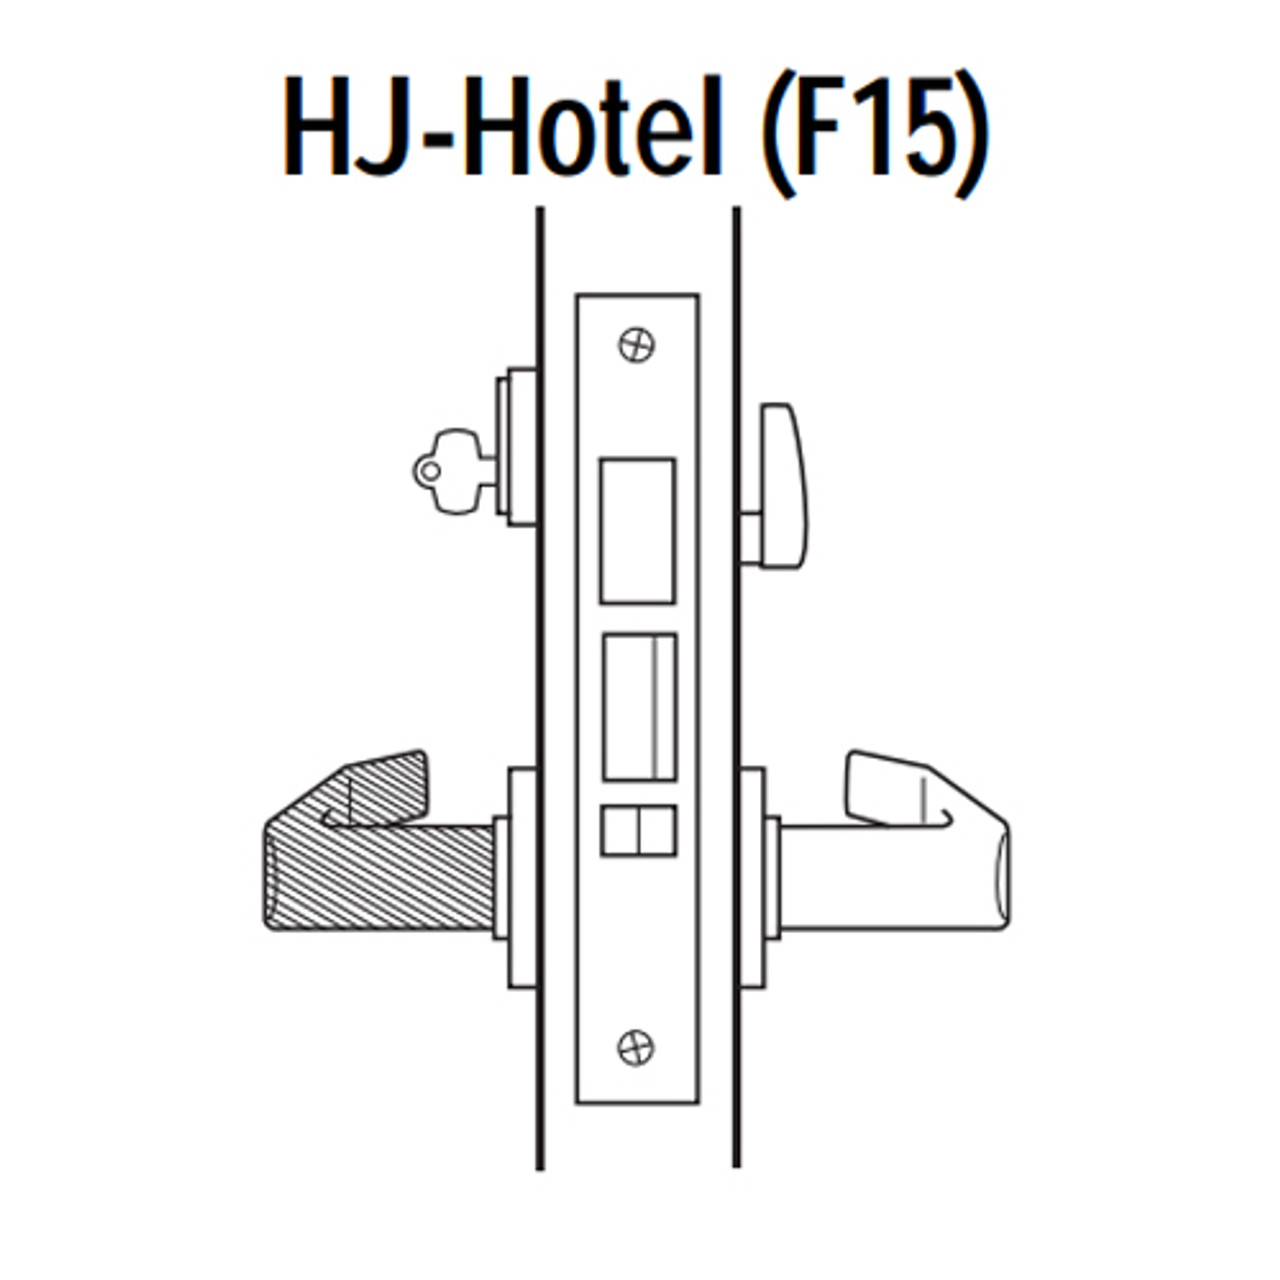 45H7HJ17LS622 Best 40H Series Hotel with Deadbolt Heavy Duty Mortise Lever Lock with Gull Wing LH in Black